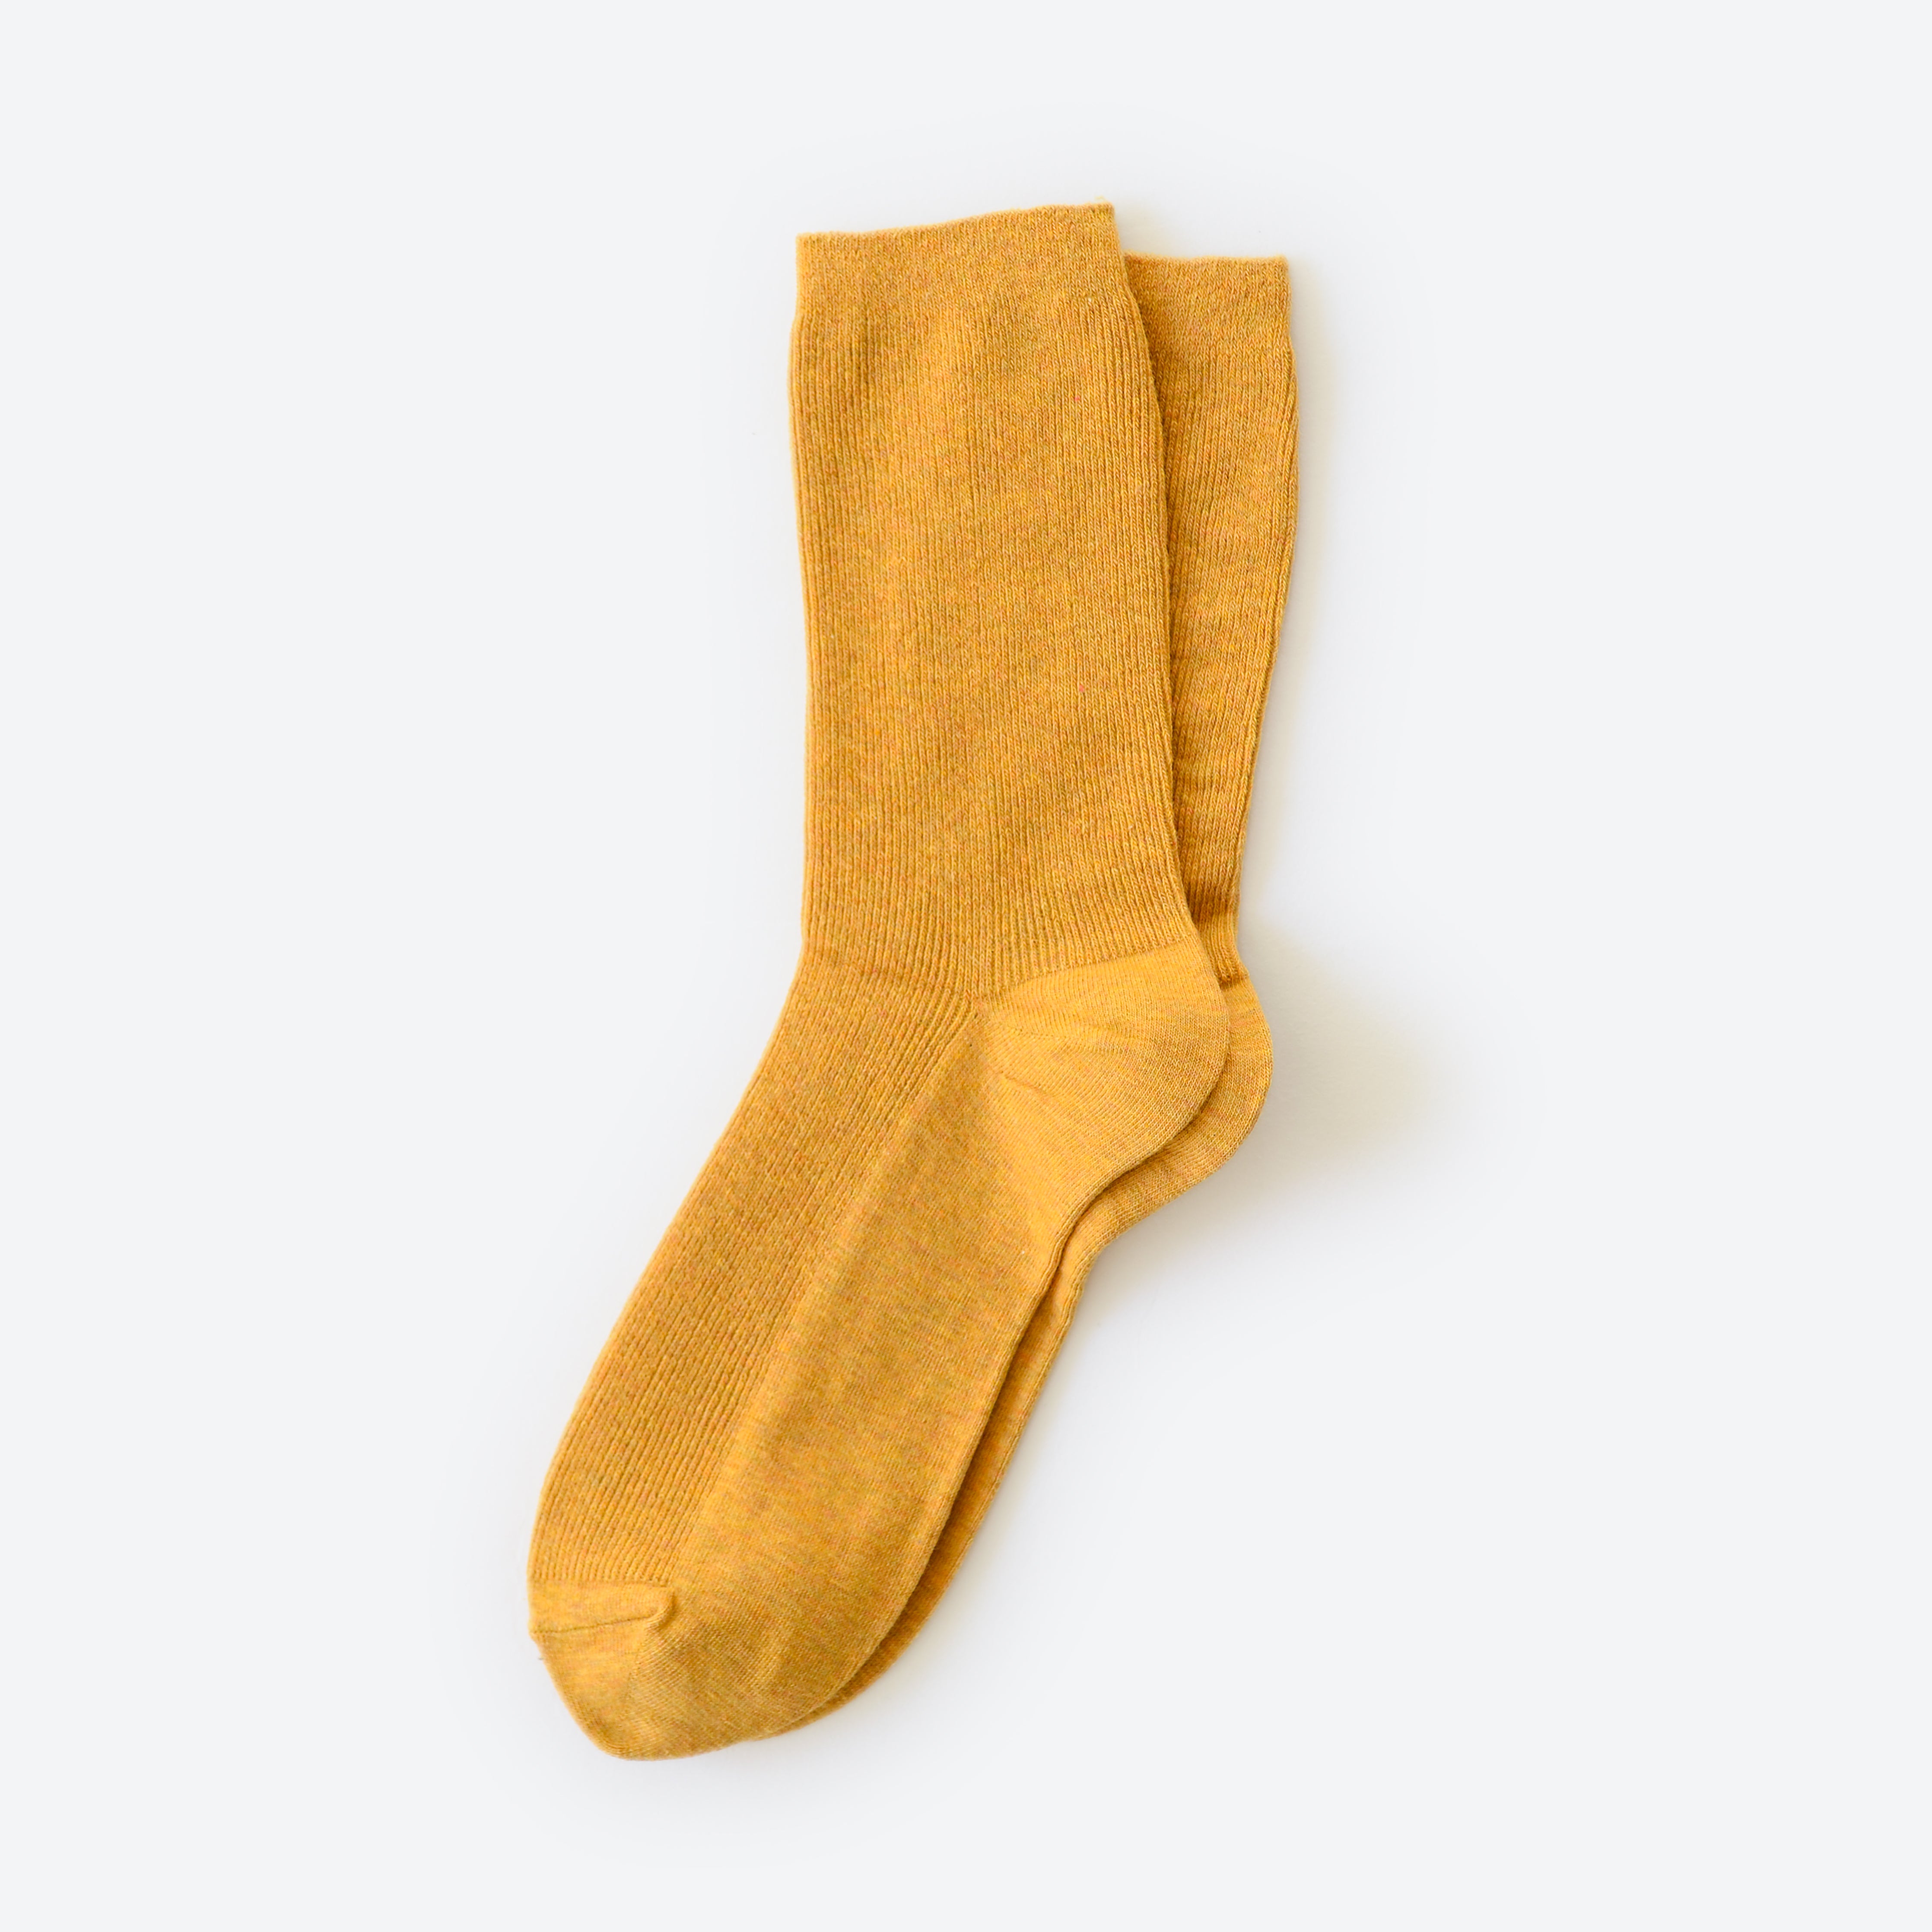 Hooray Sock Co.'s Goldenrod Crew Socks: Everyday Cotton with sunshine-y style. Unisex design, shorter crew length. 80% cotton, 20% spandex. Made in South Korea. Small (Women's 4-10).